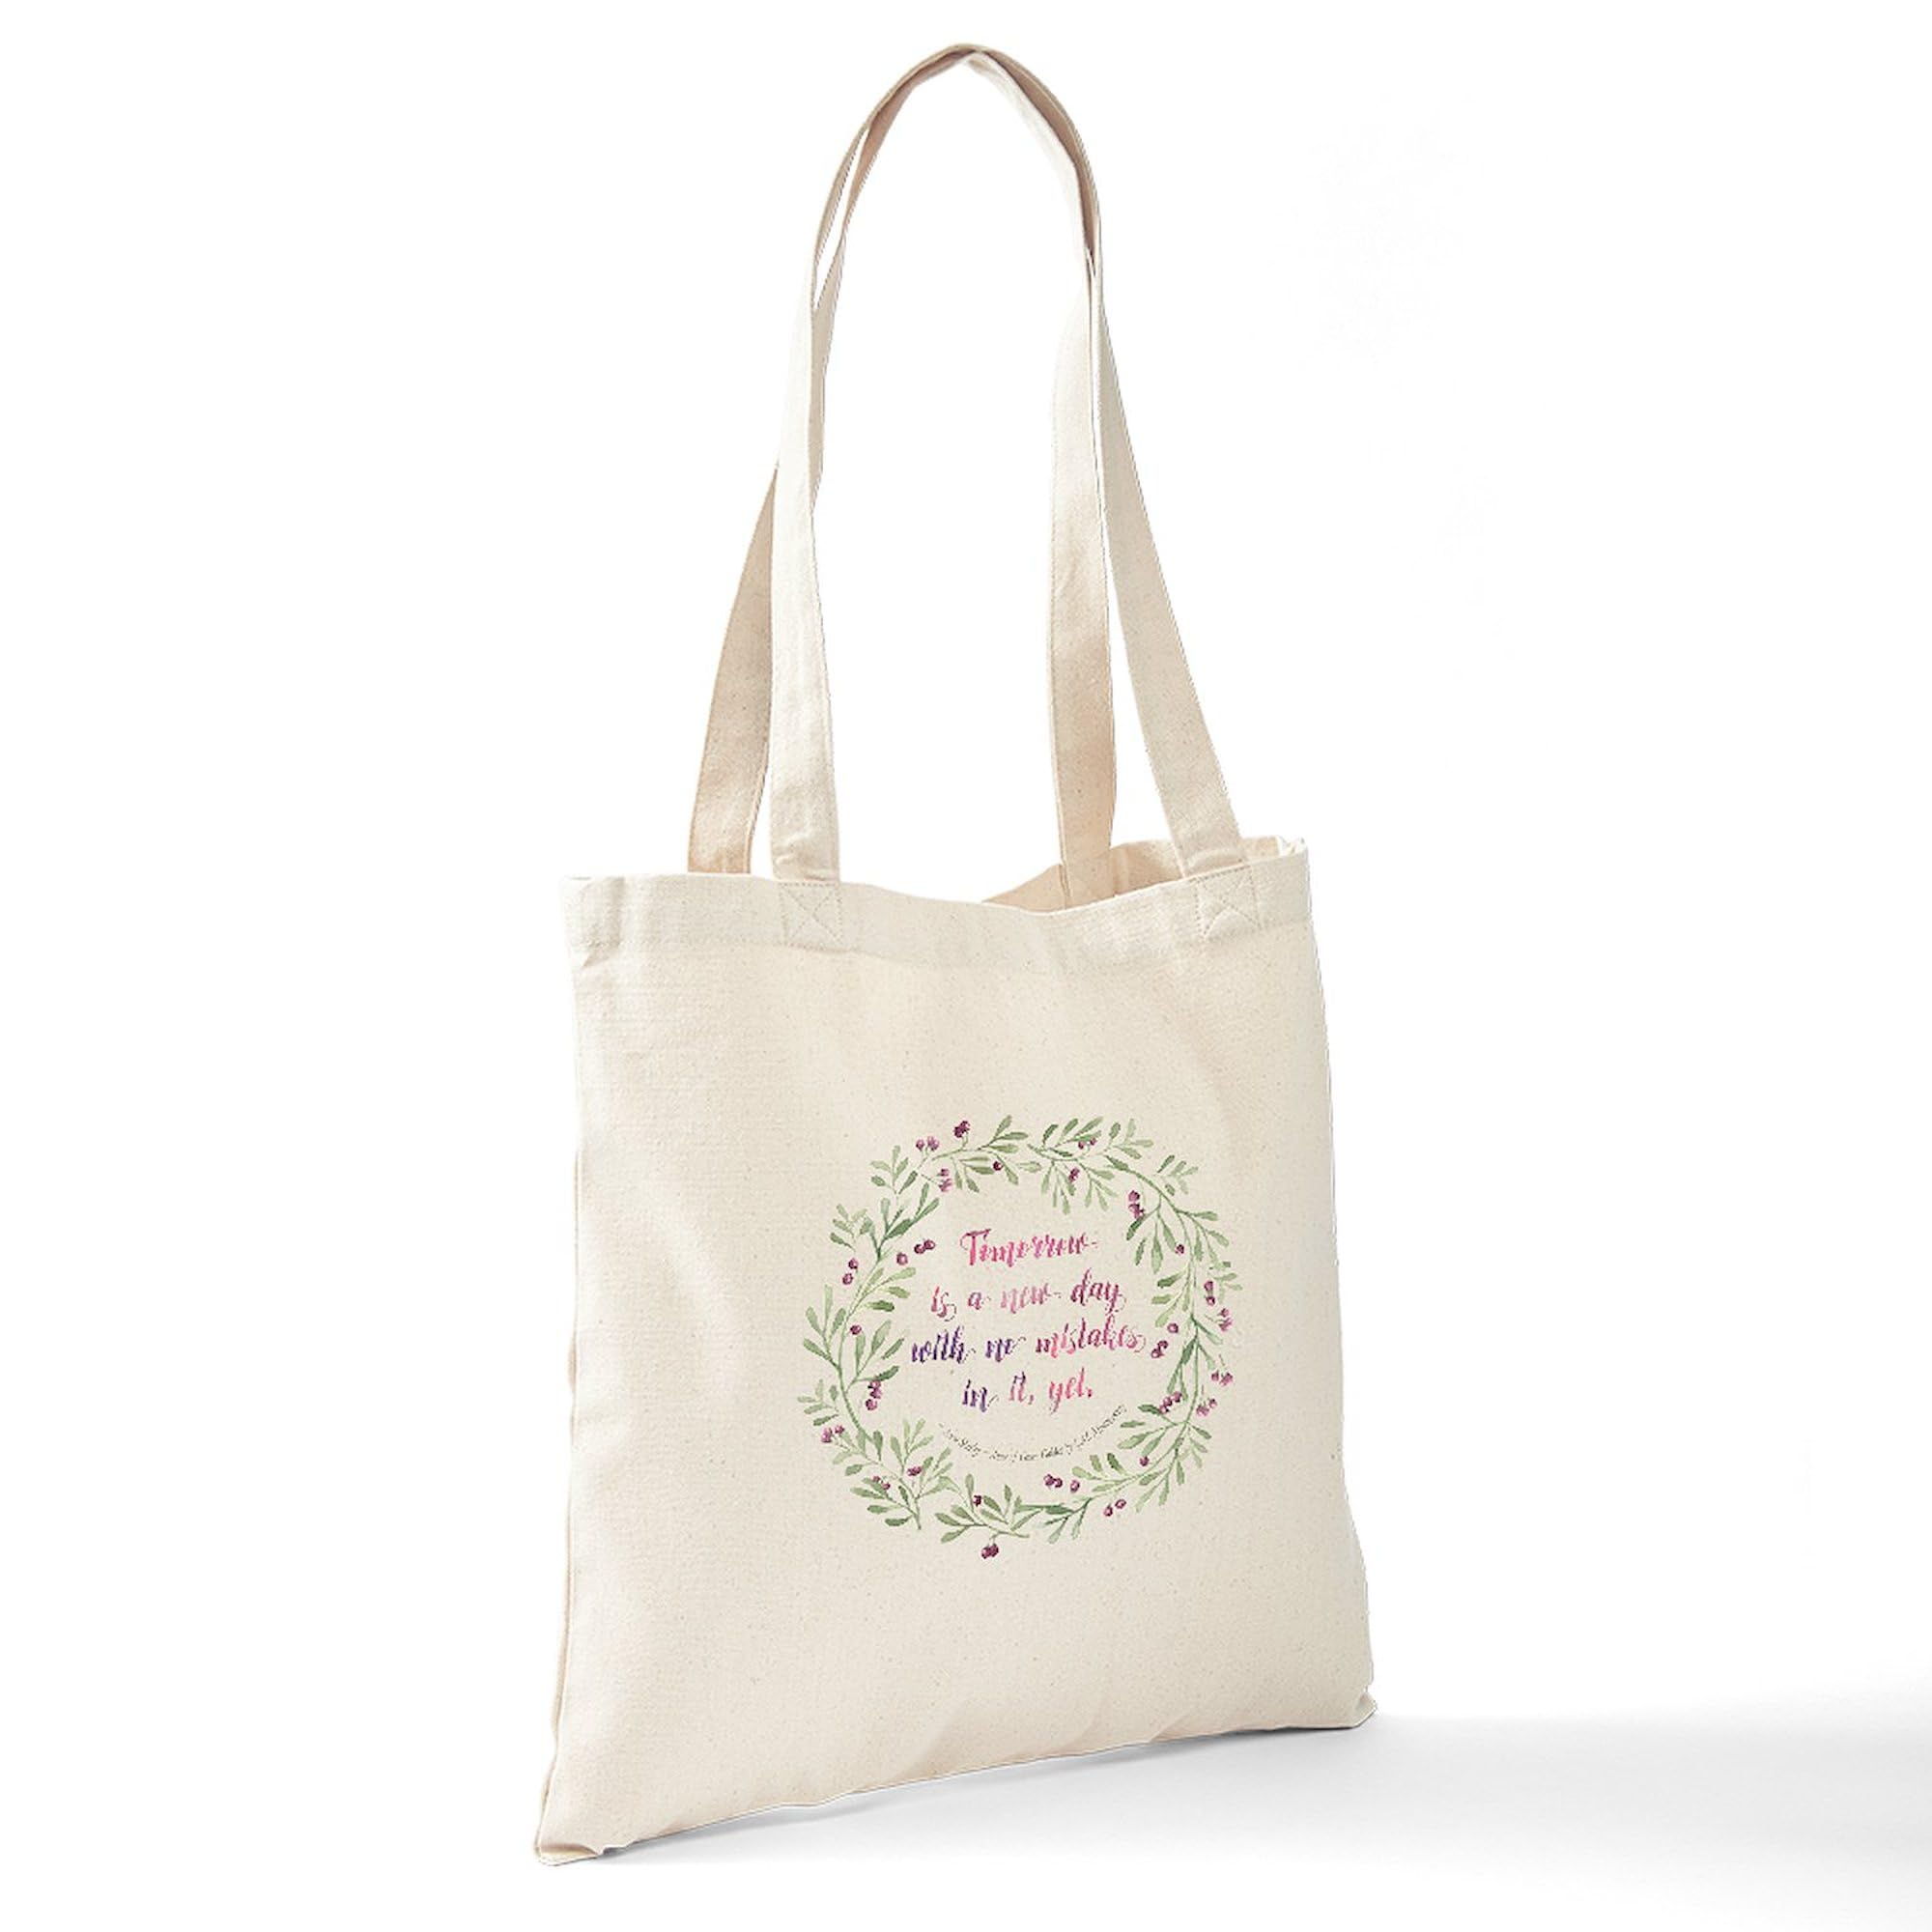 CafePress Tote Bag Anne Of Green Gables Quote Canvas Tote Shopping Bag